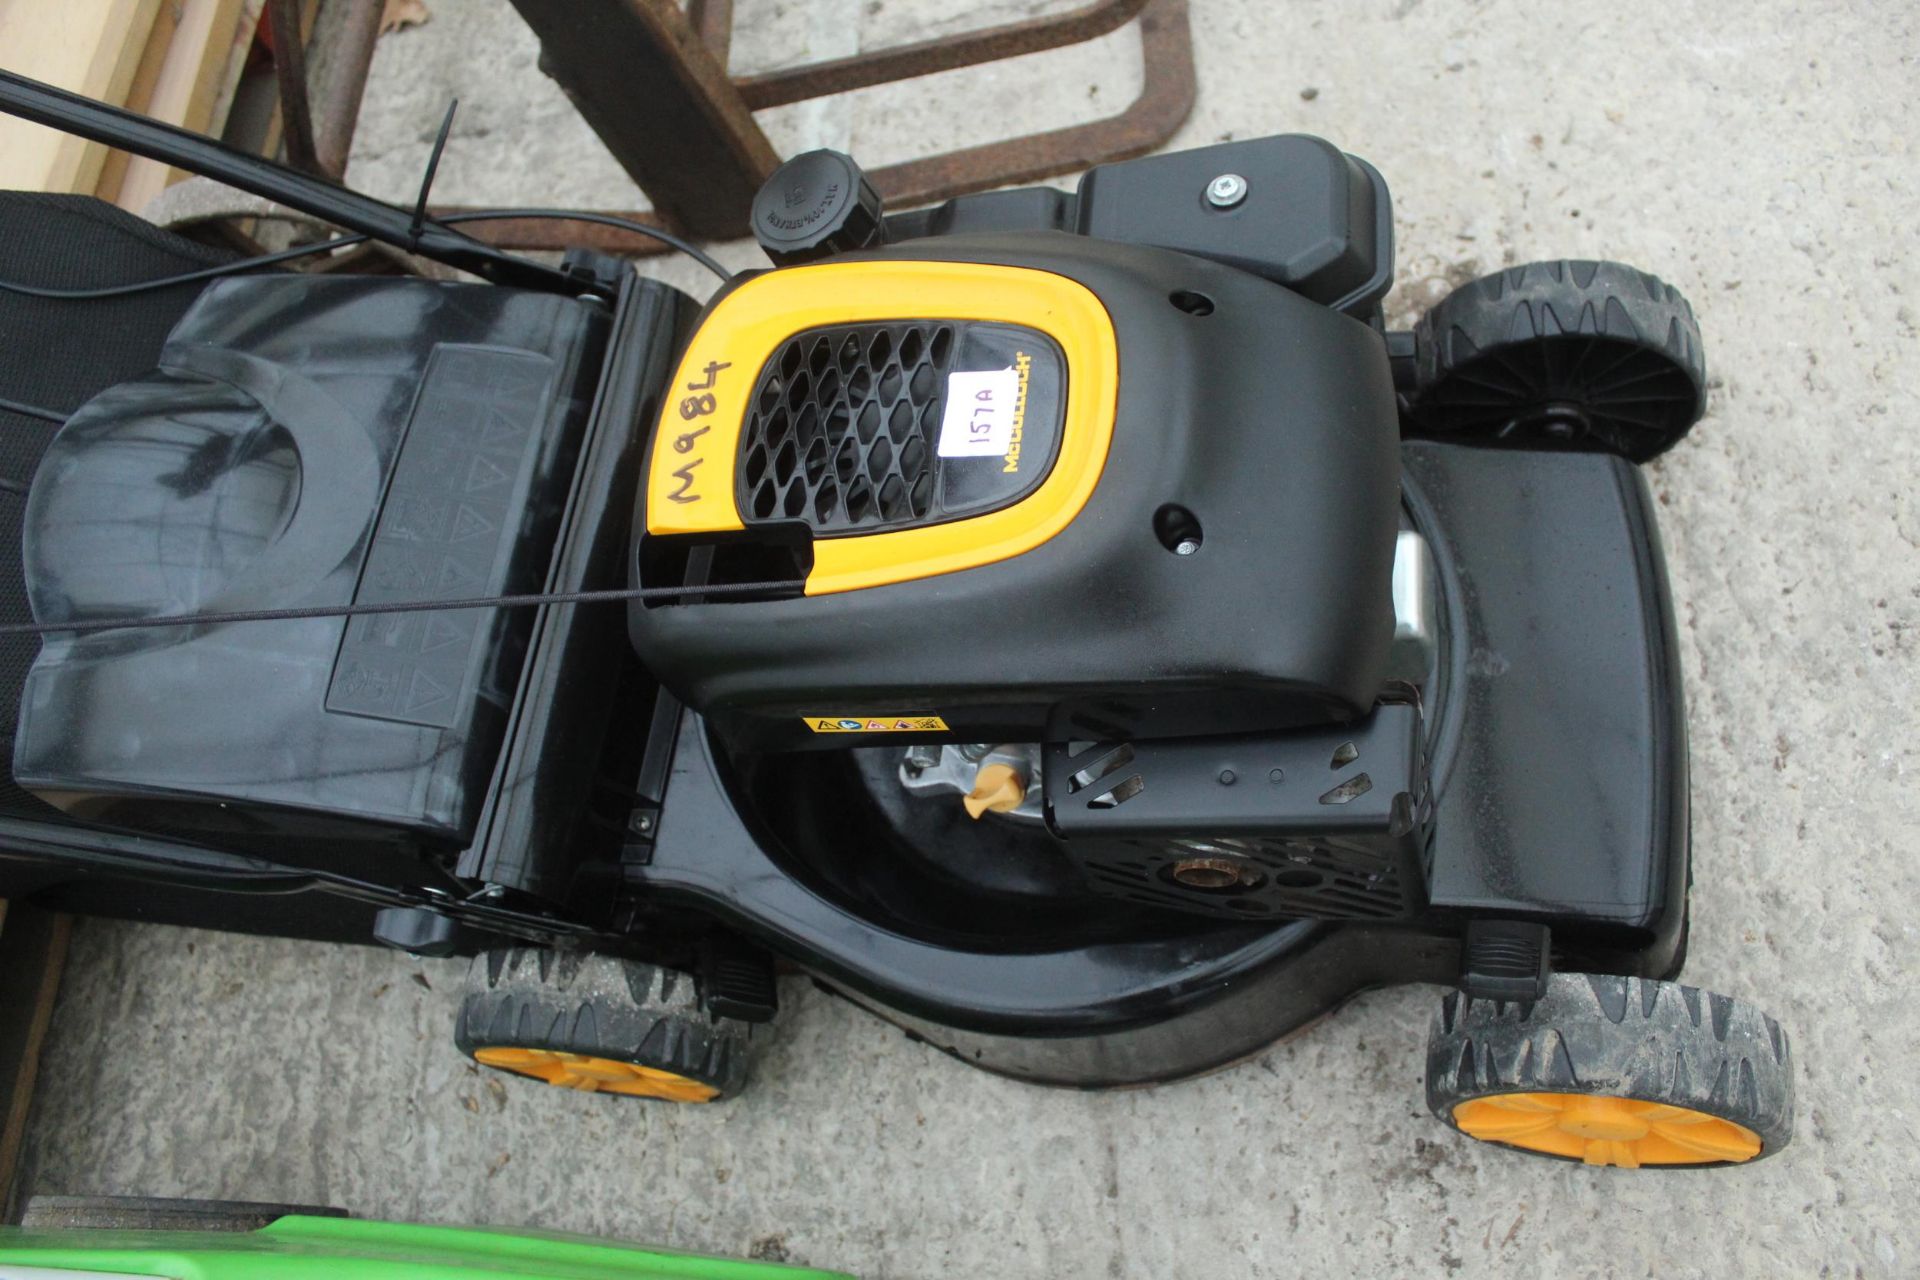 McCULLOCH LAWN MOWER IN WORKING ORDER NO VAT - Image 2 of 2